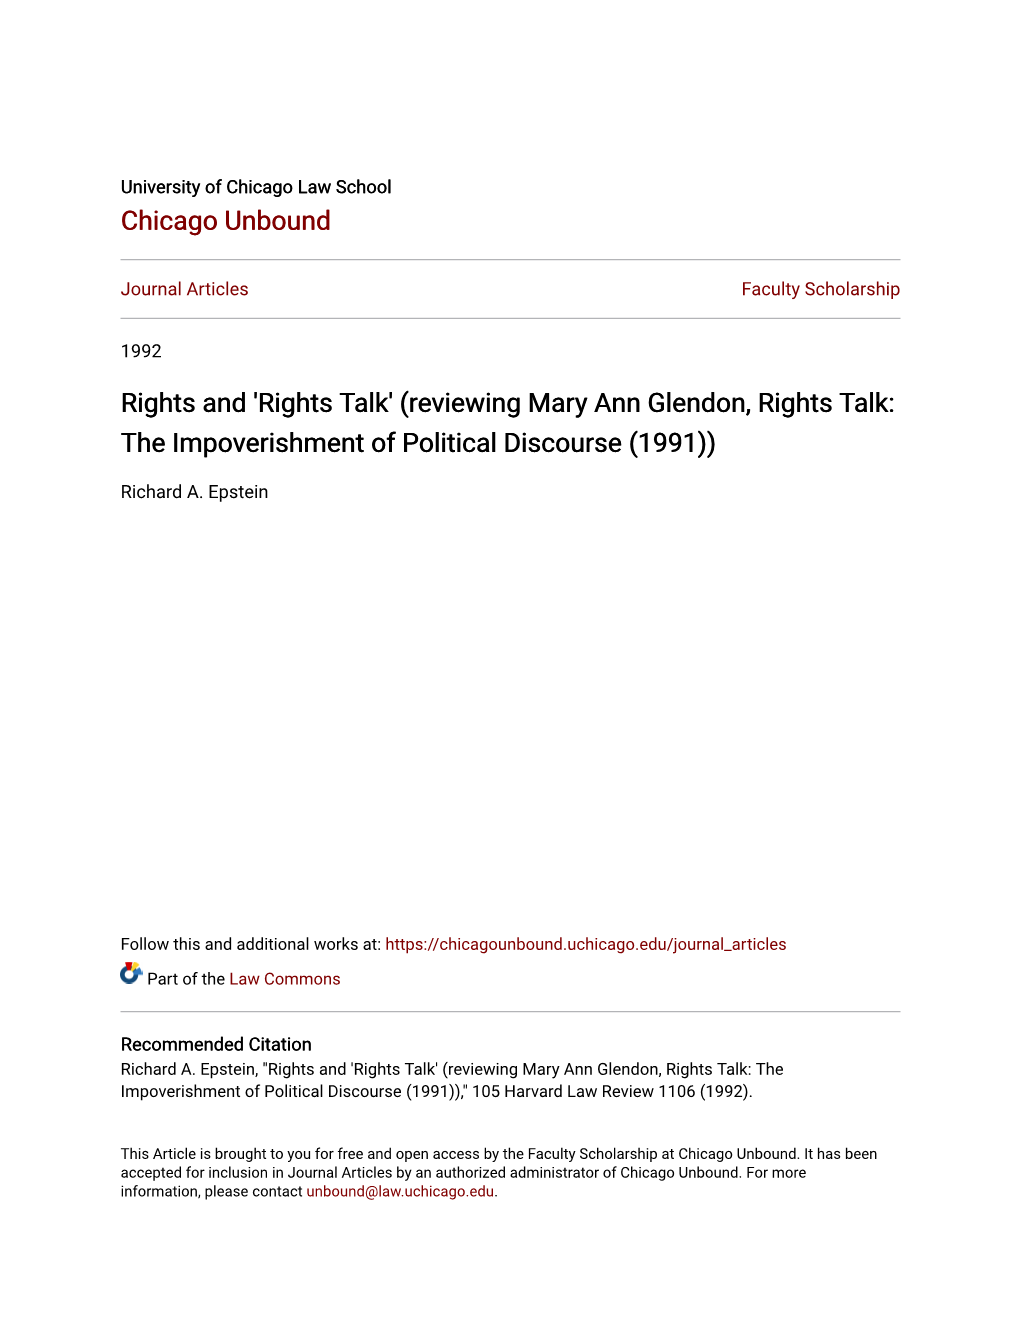 Rights and 'Rights Talk' (Reviewing Mary Ann Glendon, Rights Talk: the Impoverishment of Political Discourse (1991))